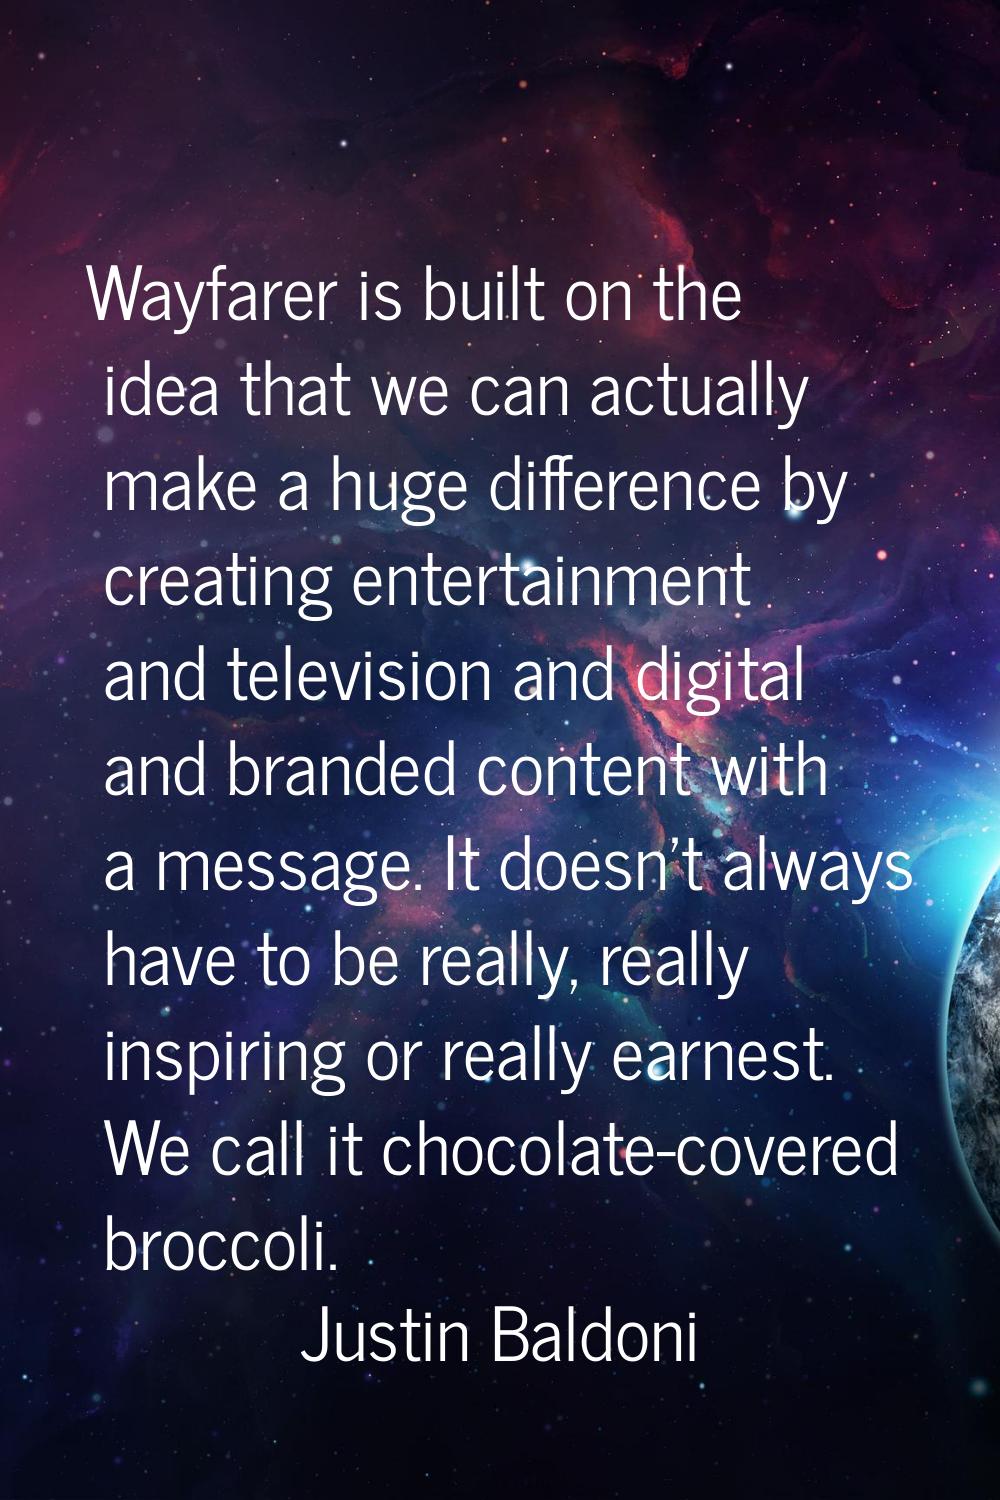 Wayfarer is built on the idea that we can actually make a huge difference by creating entertainment